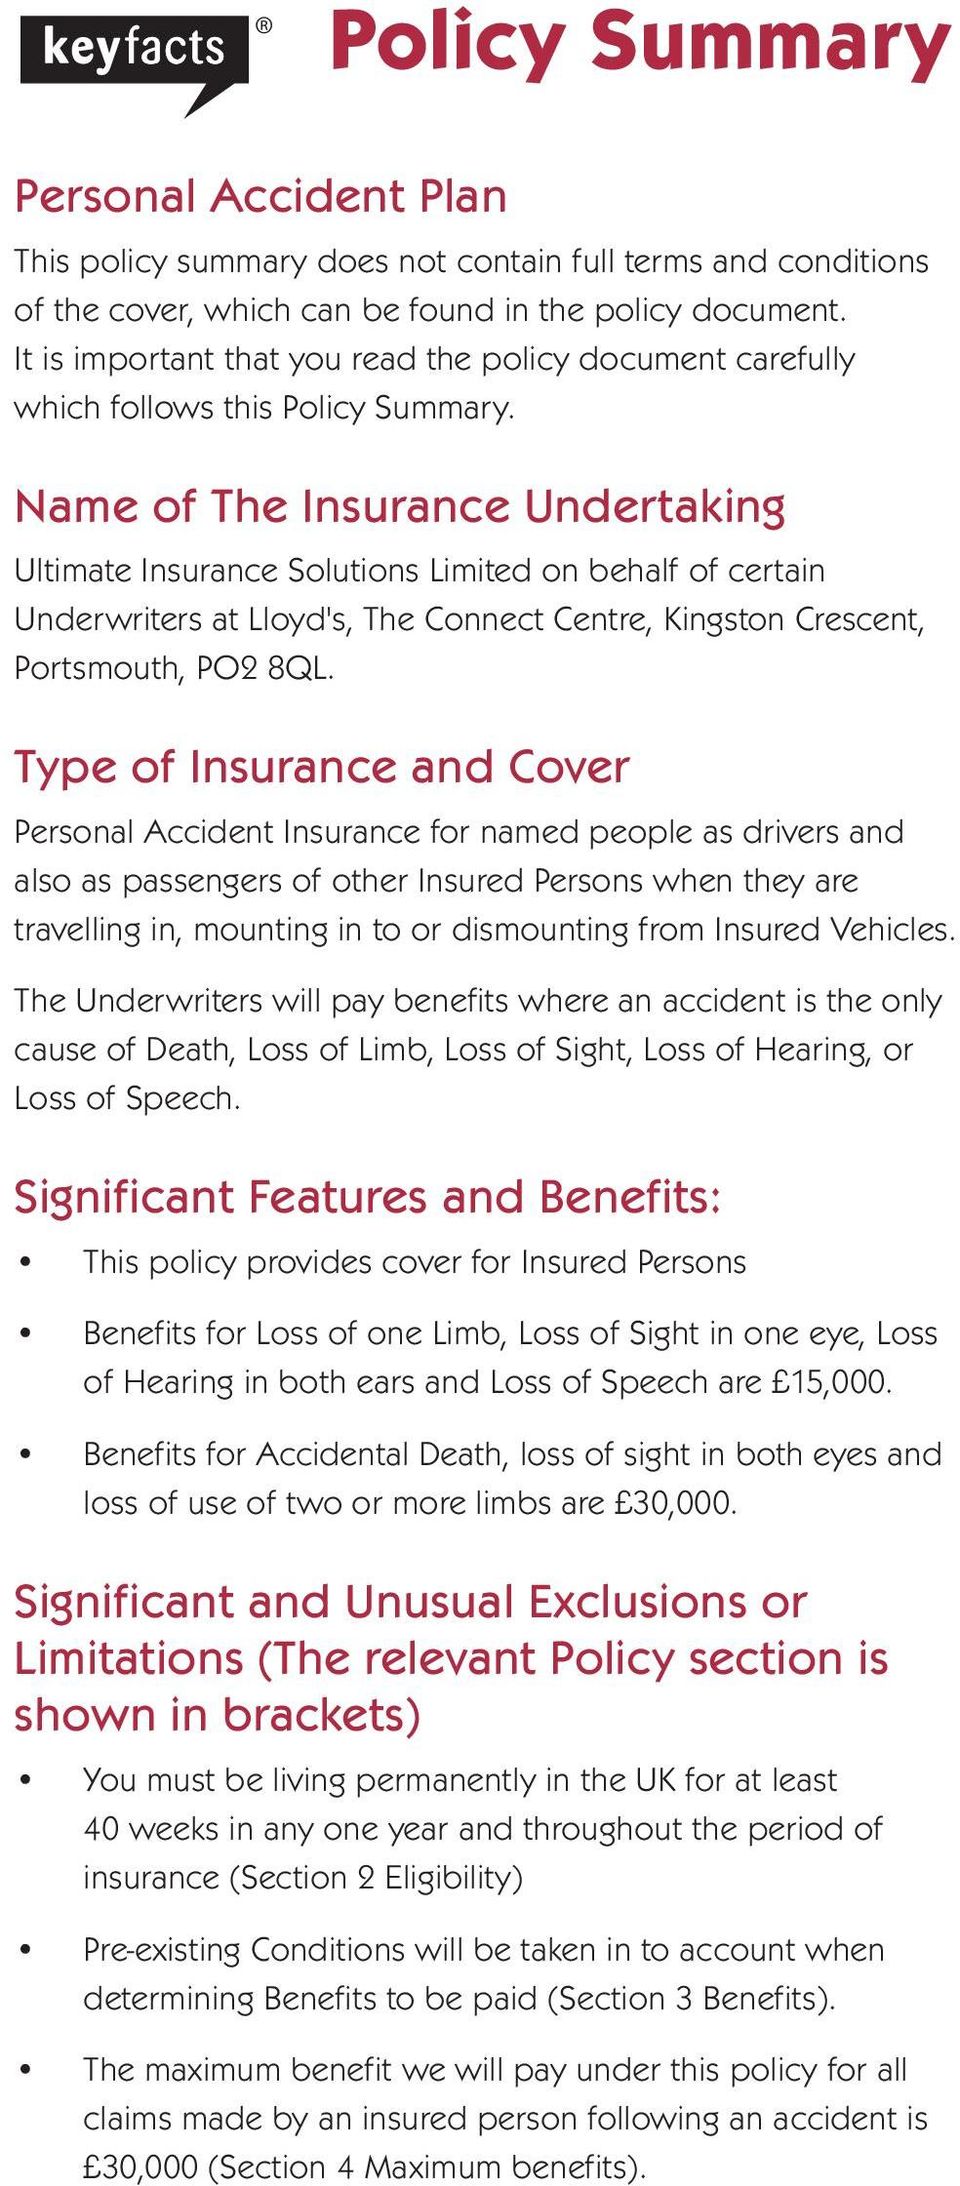 Name of The Insurance Undertaking Ultimate Insurance Solutions Limited on behalf of certain Underwriters at Lloyd's, The Connect Centre, Kingston Crescent, Portsmouth, PO2 8QL.